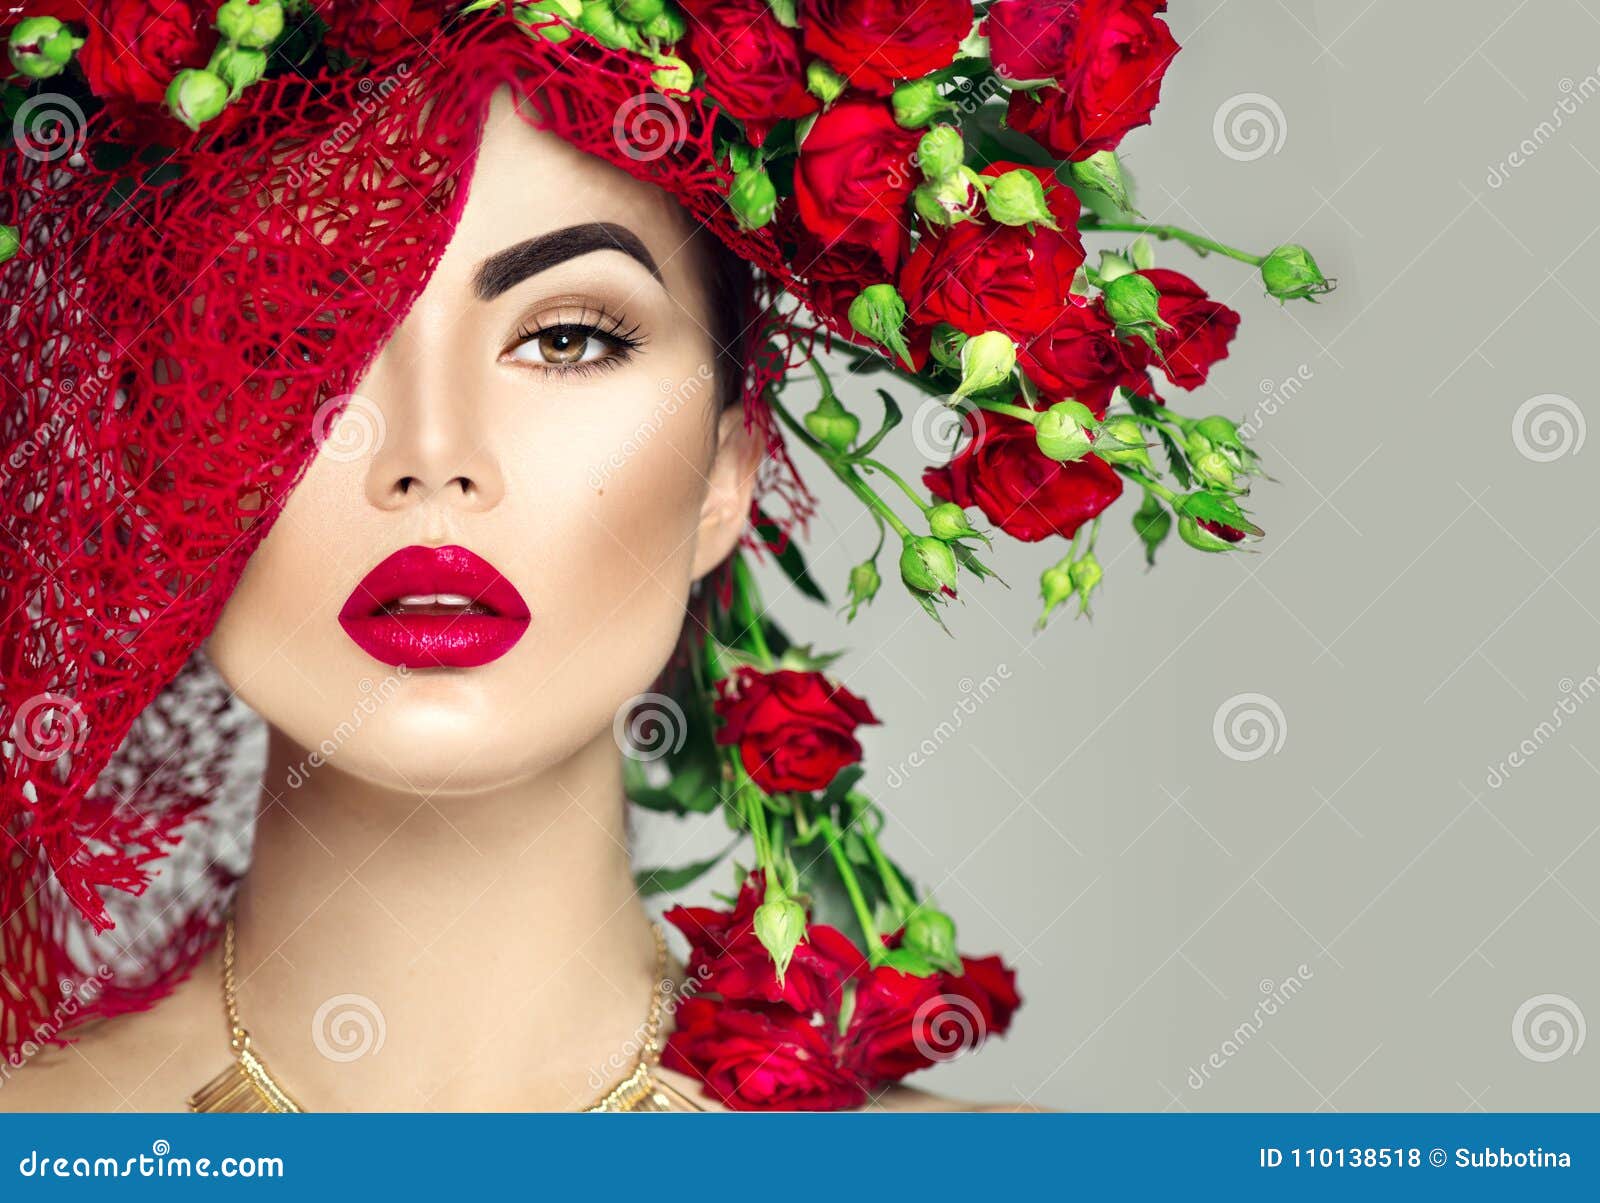 model girl with red roses flower wreath and fashion makeup. flowers hairstyle